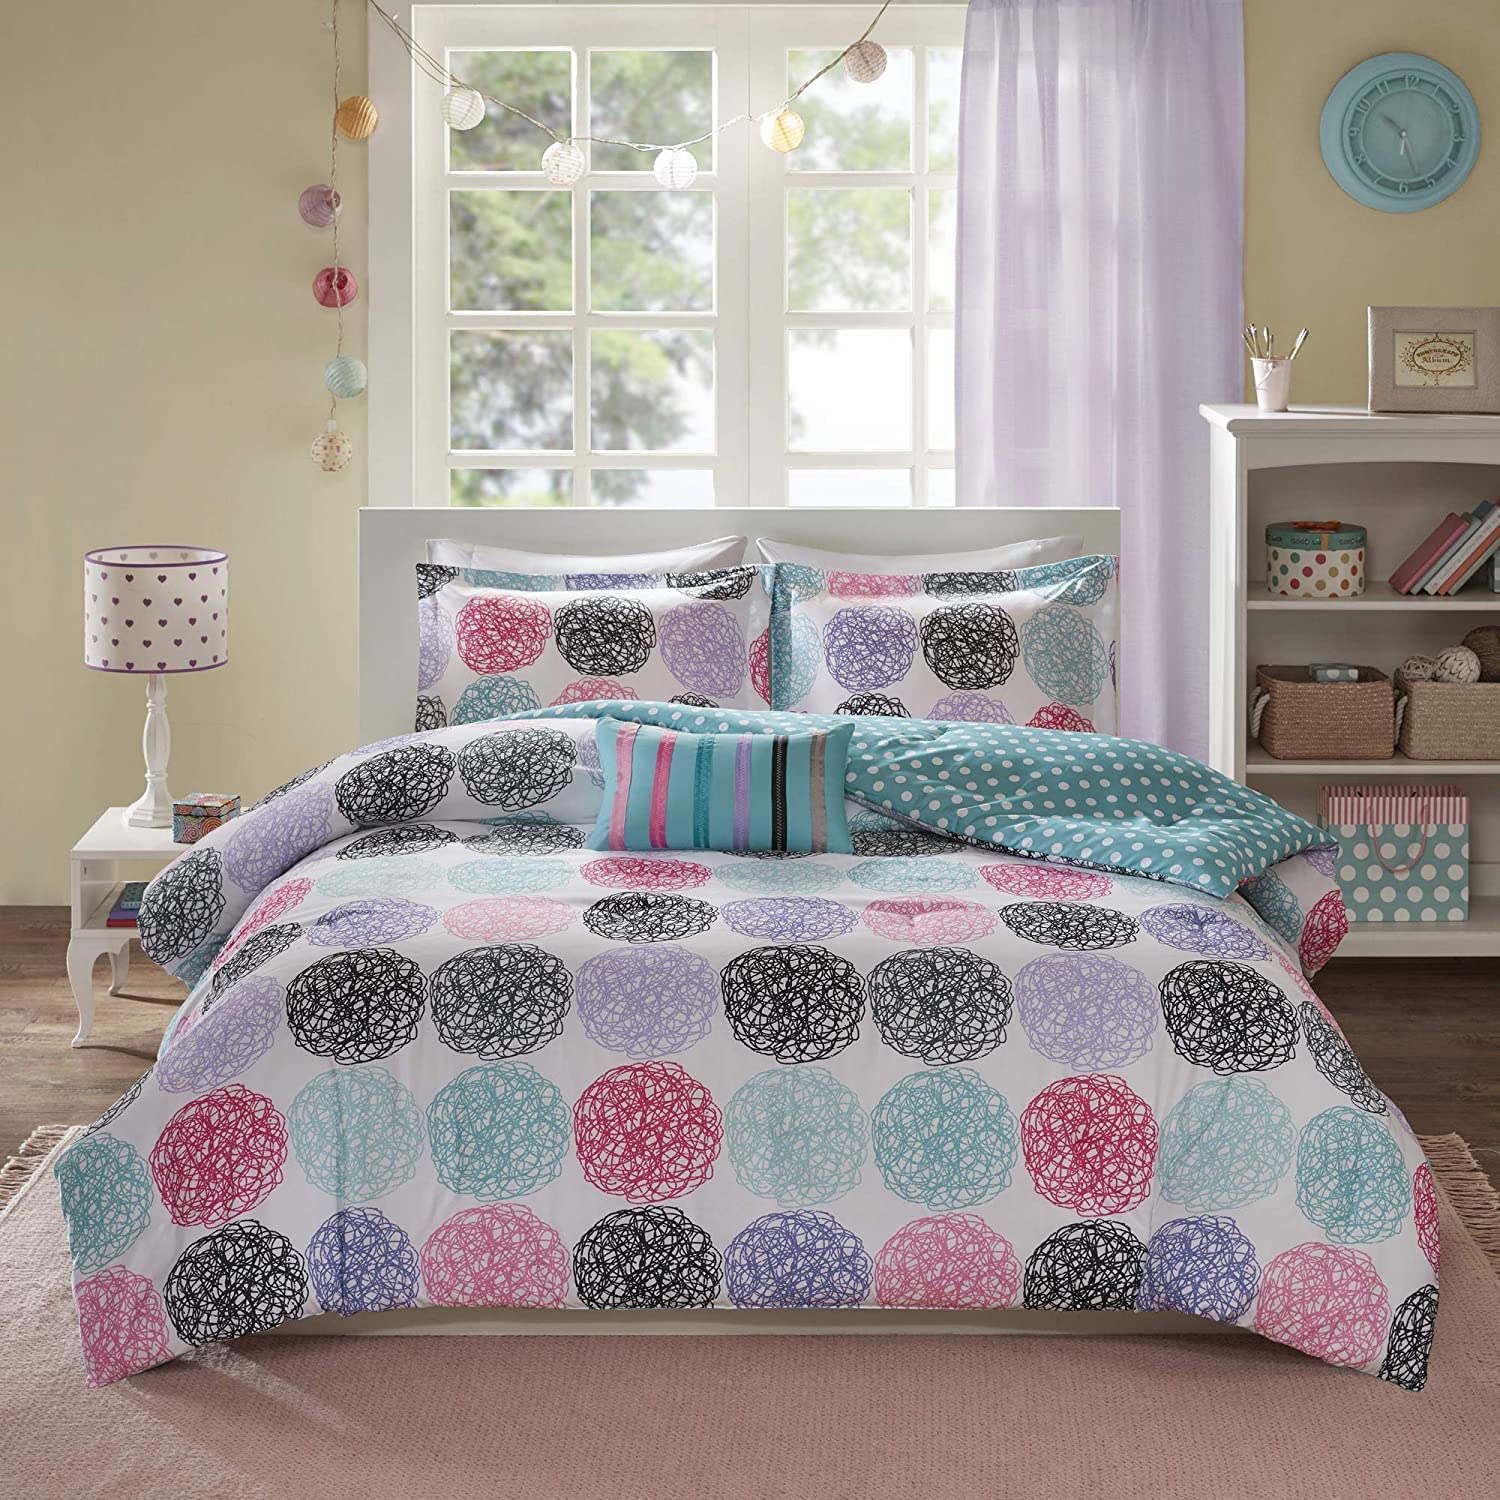 Book Cover Mi Zone Carly Comforter Set, Doodled Circles Polka Dots Bed Sets – Ultra Soft Microfiber Teen Bedding For Girls Bedroom, Full/Queen, Teal Purple 4 Piece Full/Queen Carly Purple Comforter